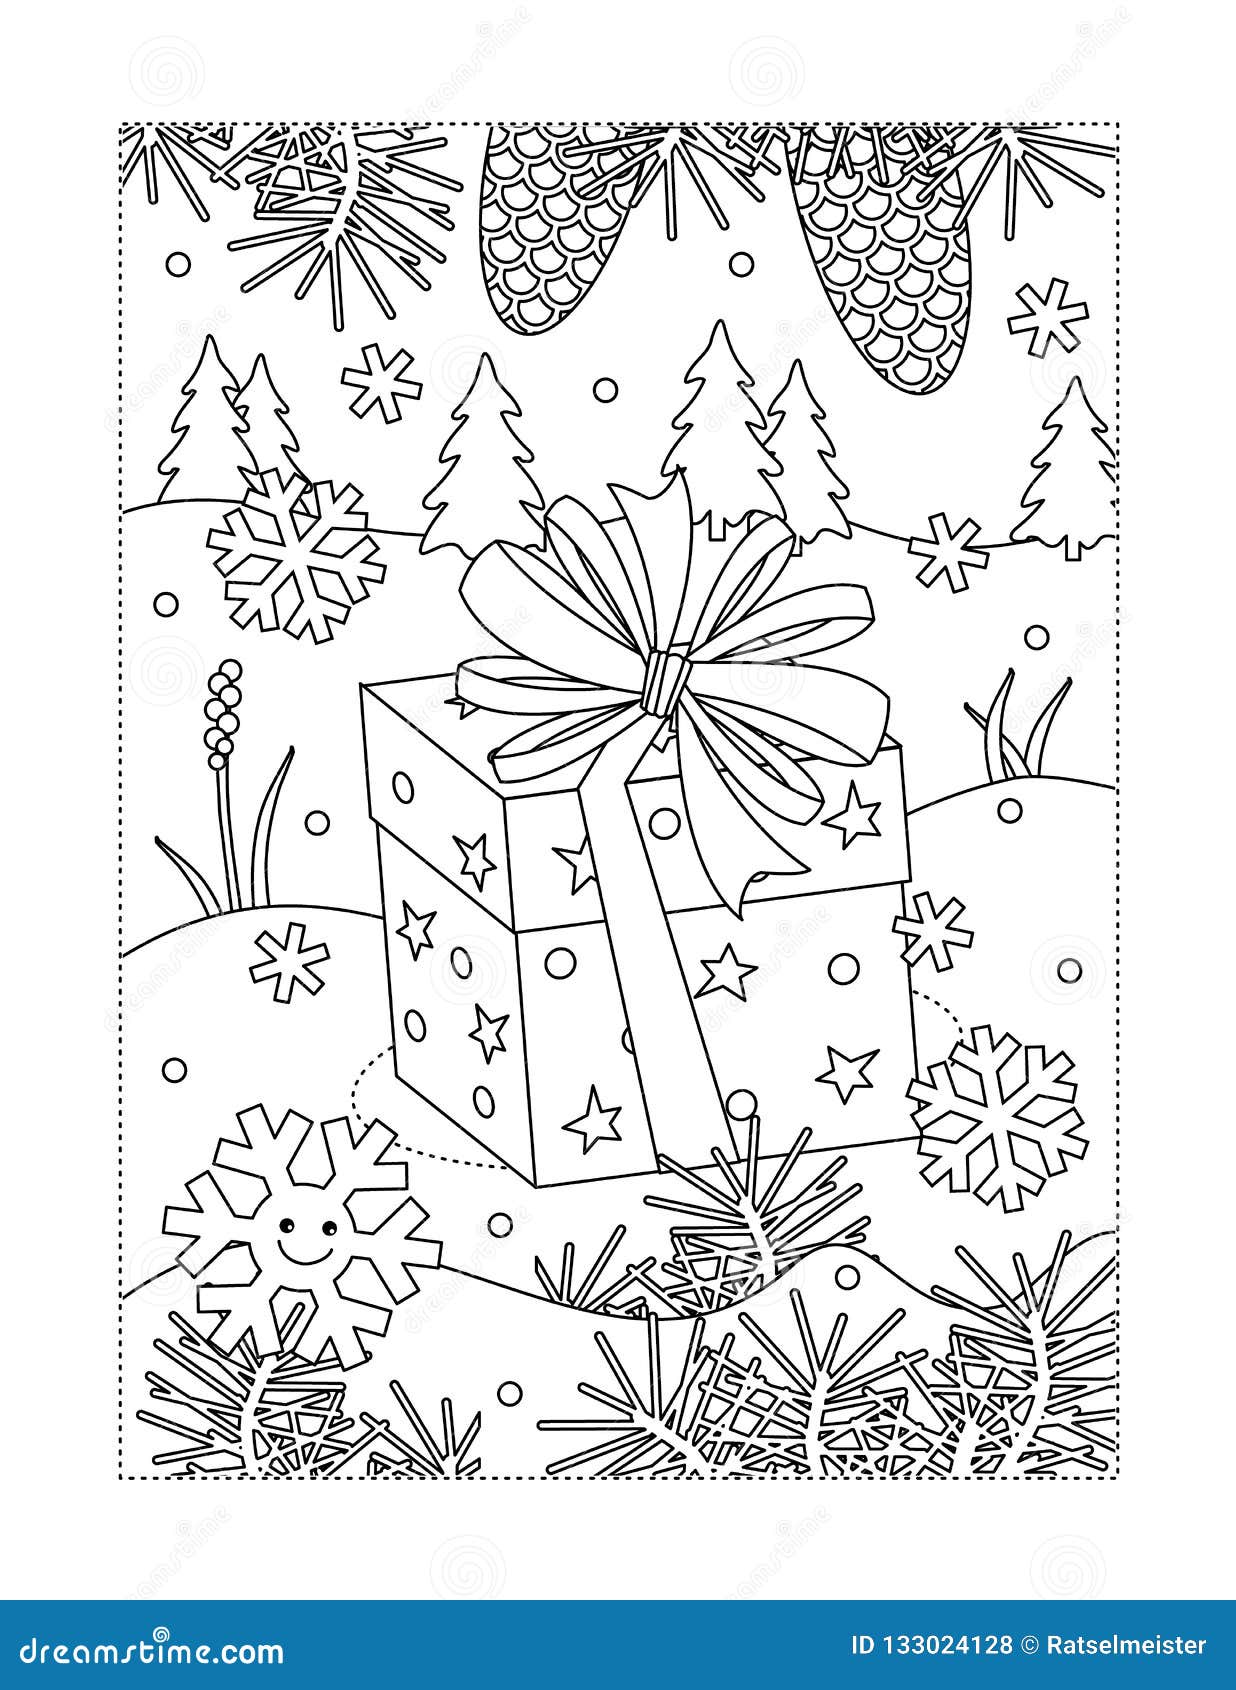 Coloring page with holiday present stock vector